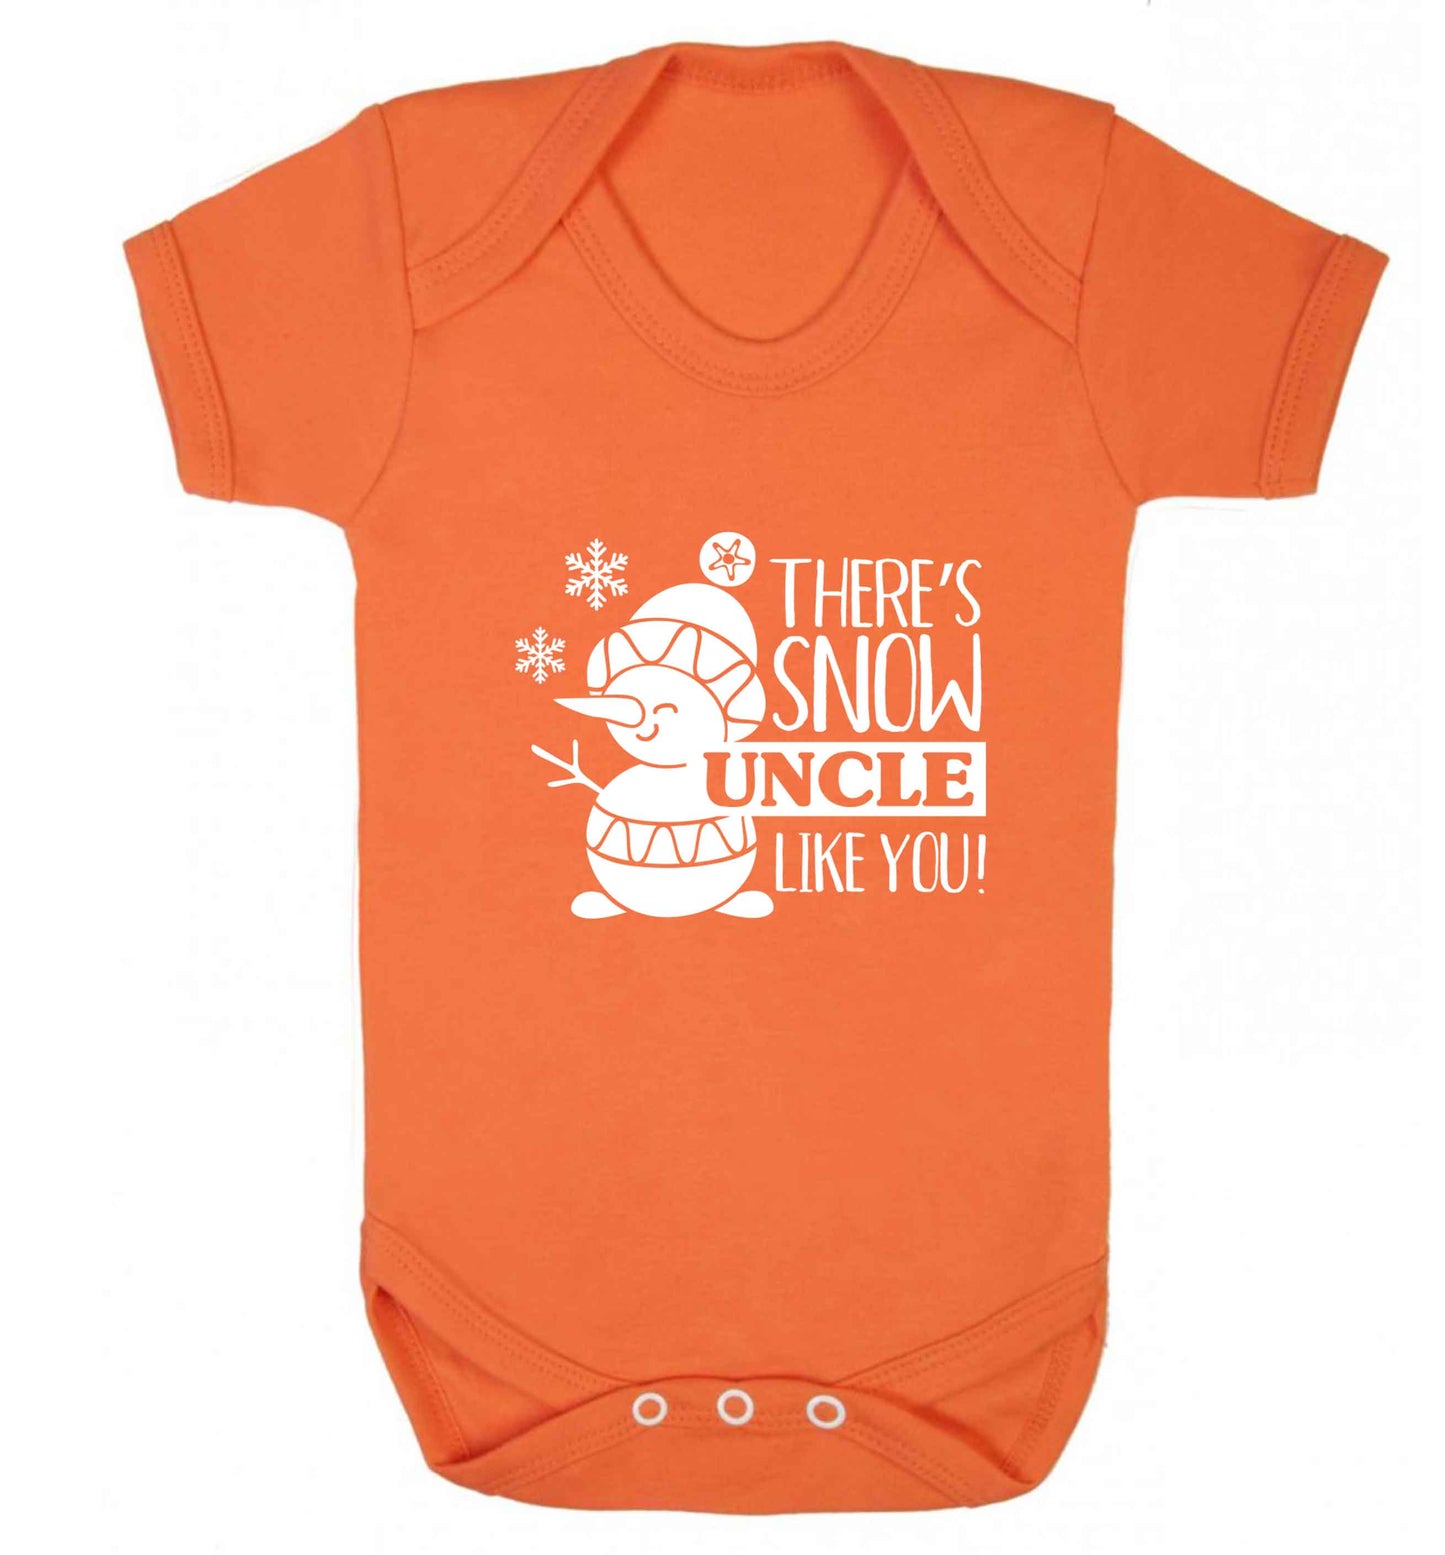 There's snow uncle like you baby vest orange 18-24 months